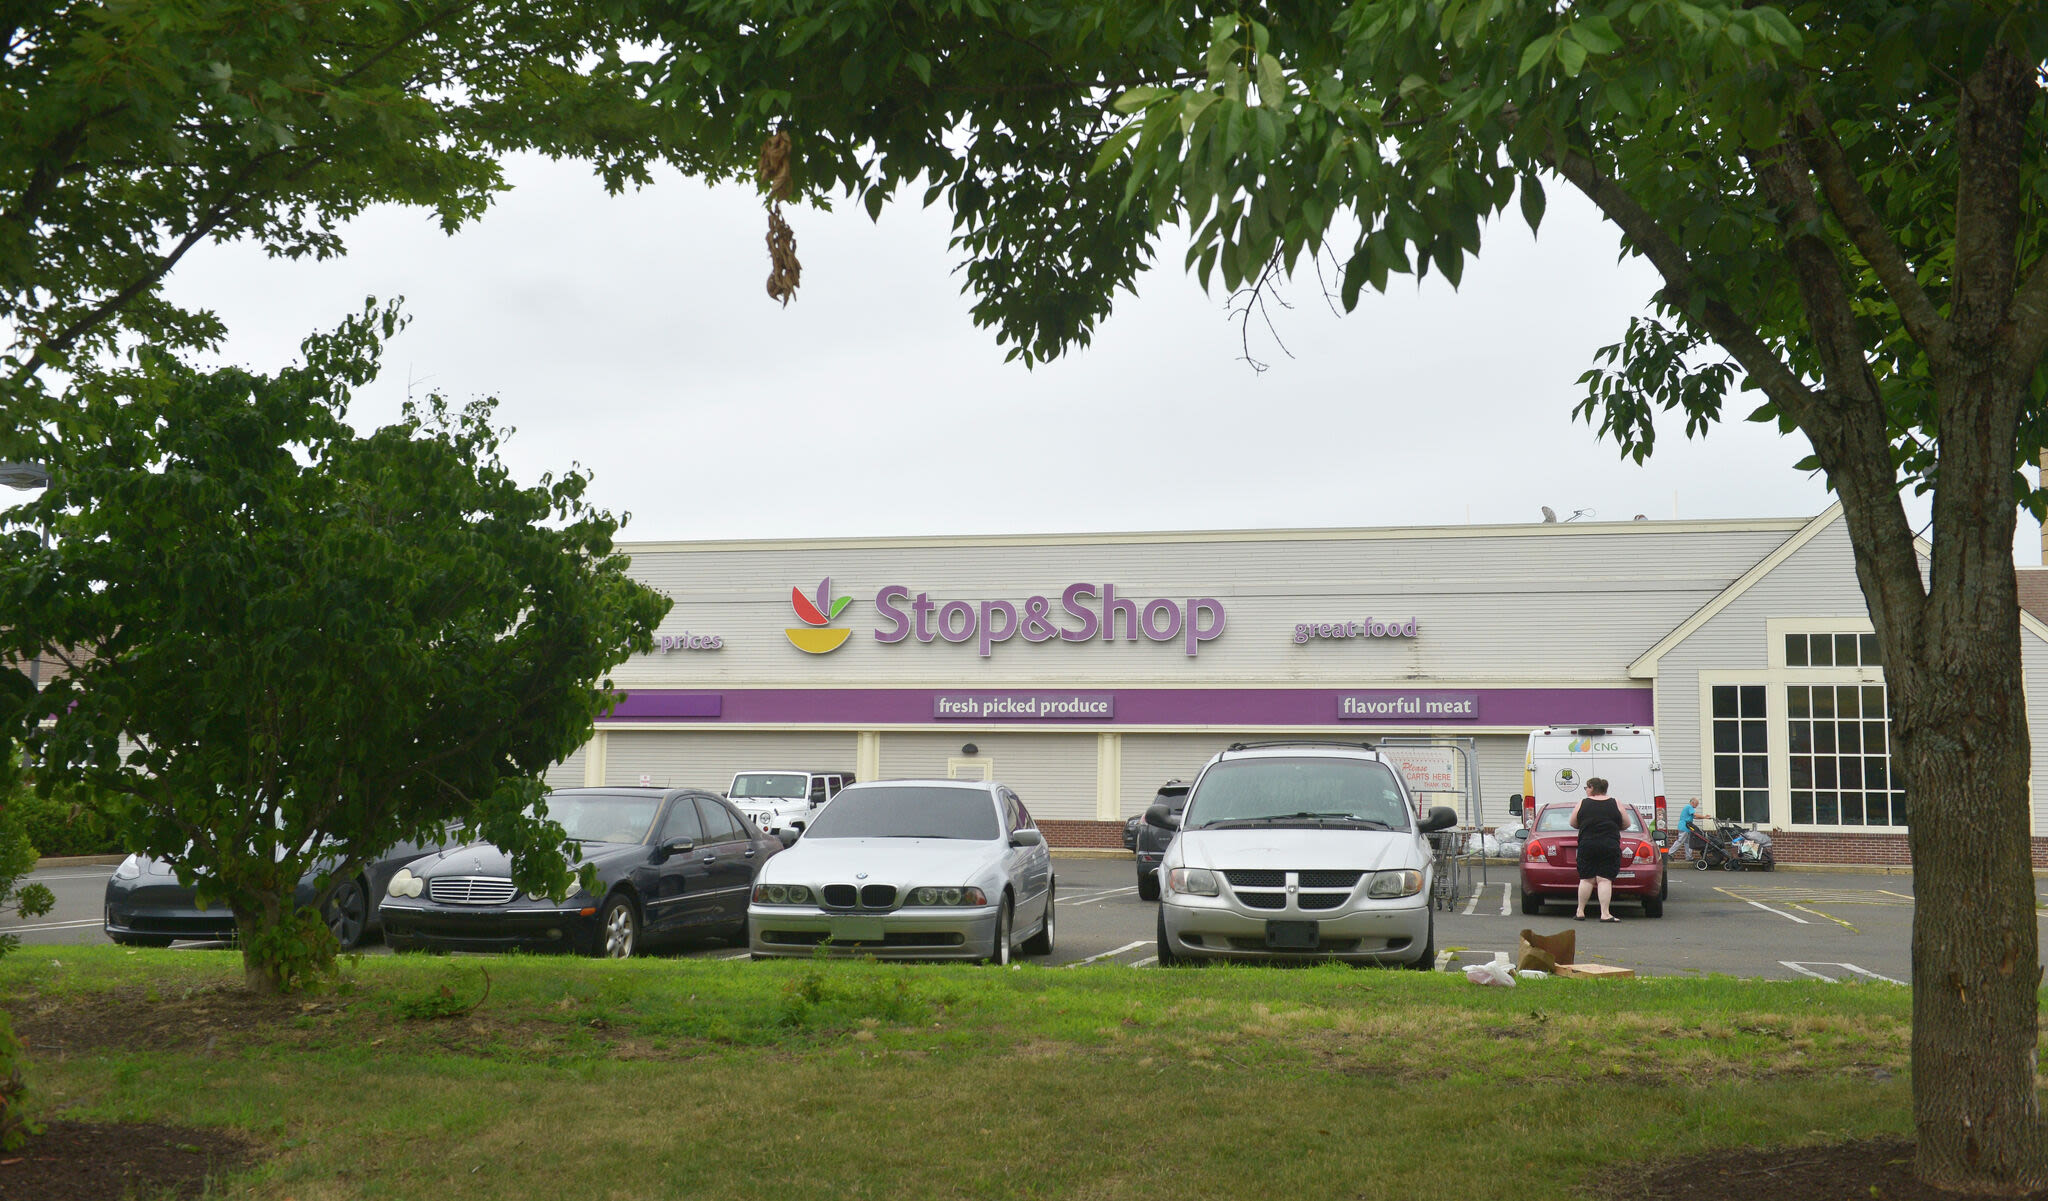 Stop & Shop reopens delis at CT locations after 2nd closure in 5 days to remove Boar's Head products